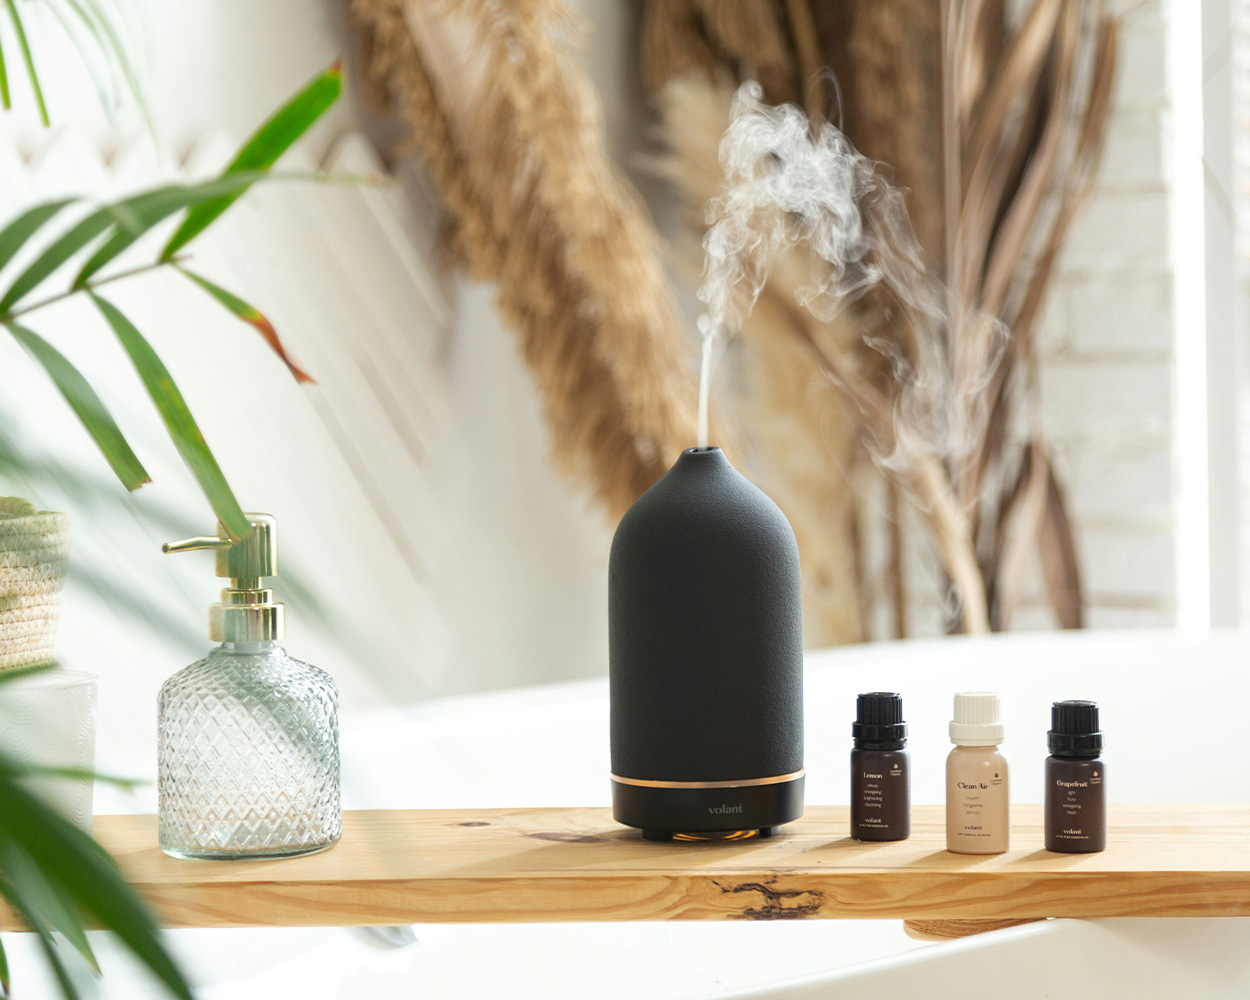 Wooden shelf displaying a black aromatherapy diffuser, small bottles of essential oils, and glass soap dispenser.  